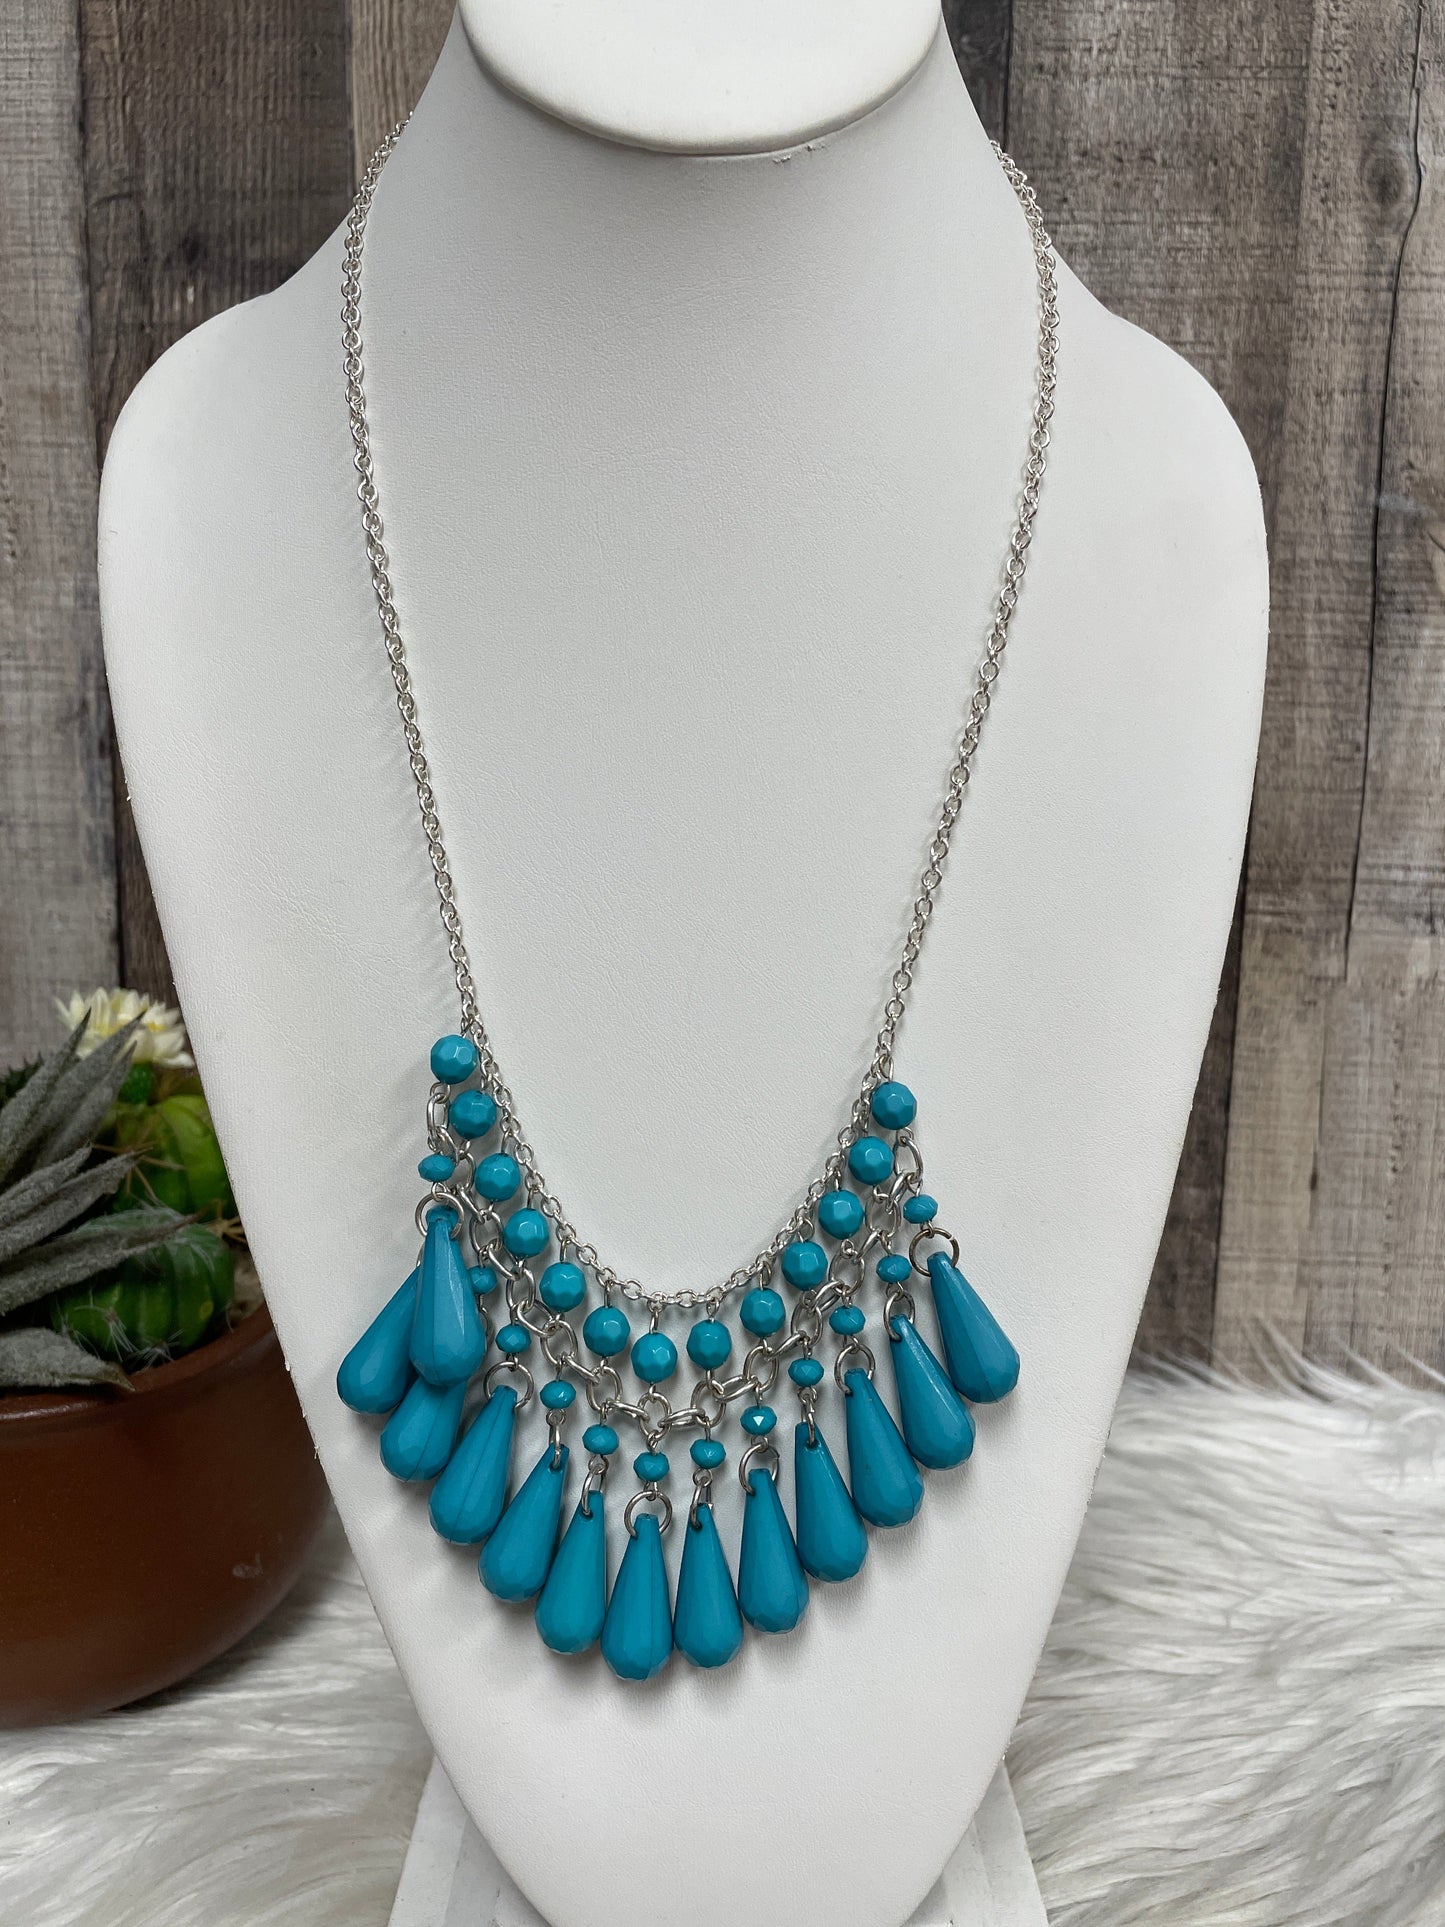 Necklace Layered By Simply Vera